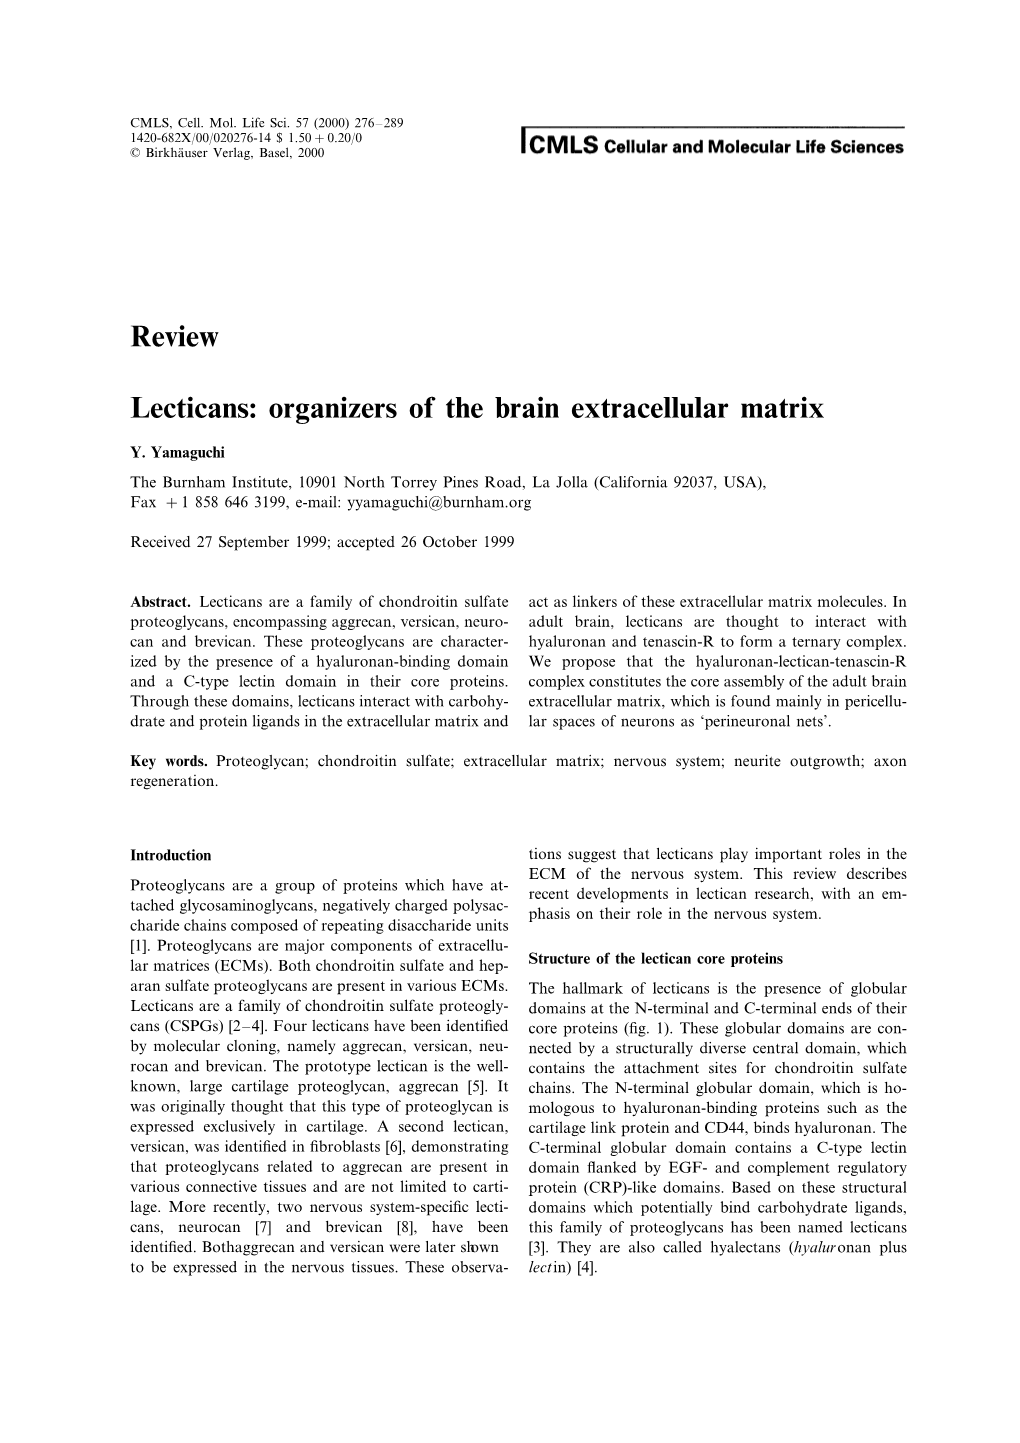 Review Lecticans: Organizers of the Brain Extracellular Matrix